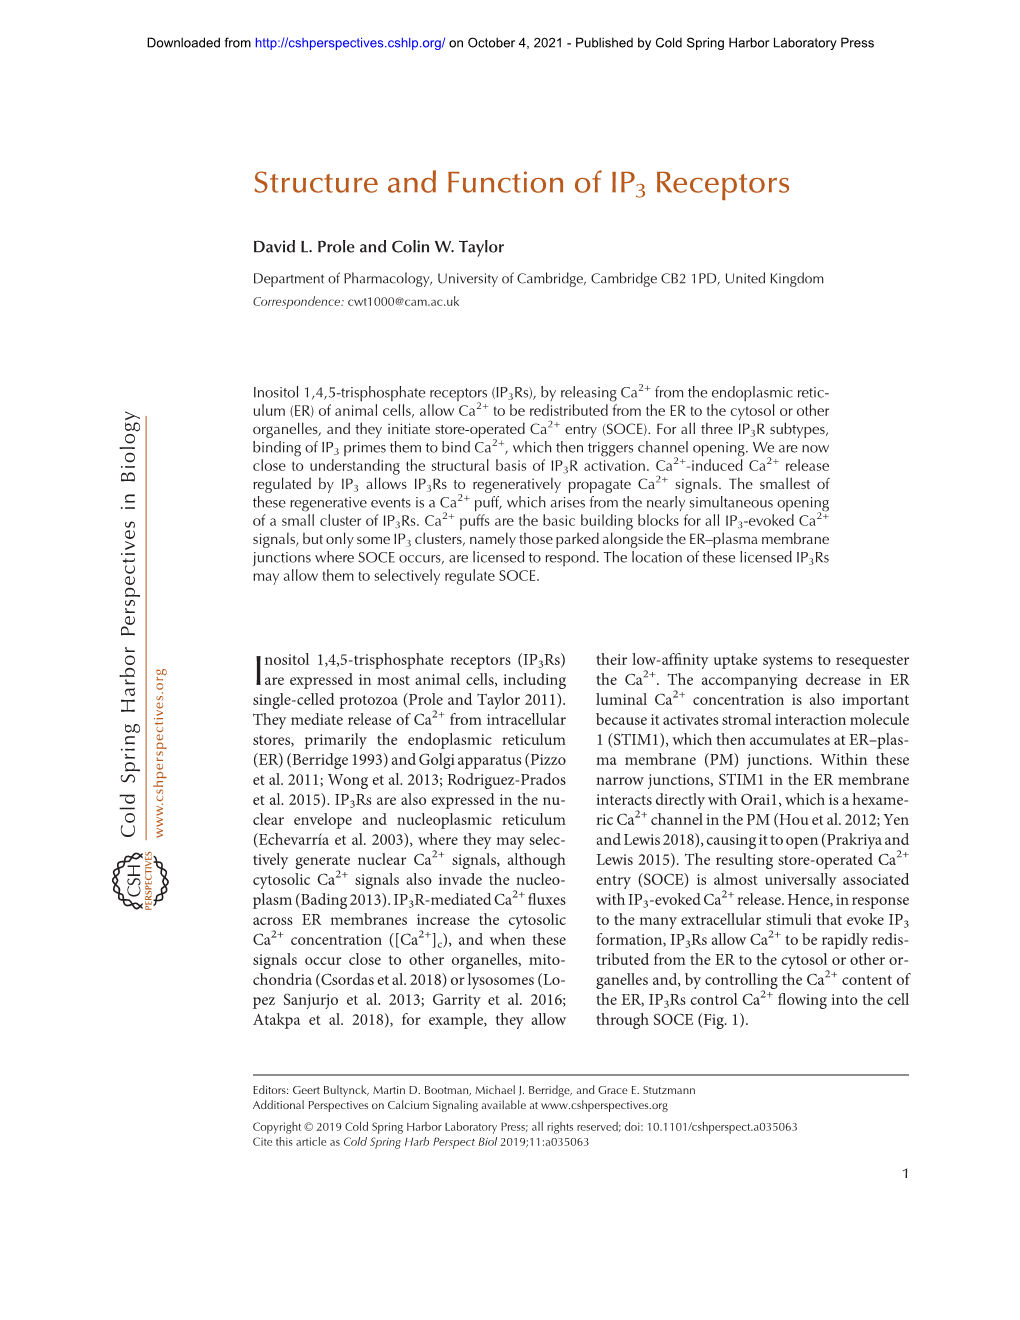 Structure and Function of IP3 Receptors